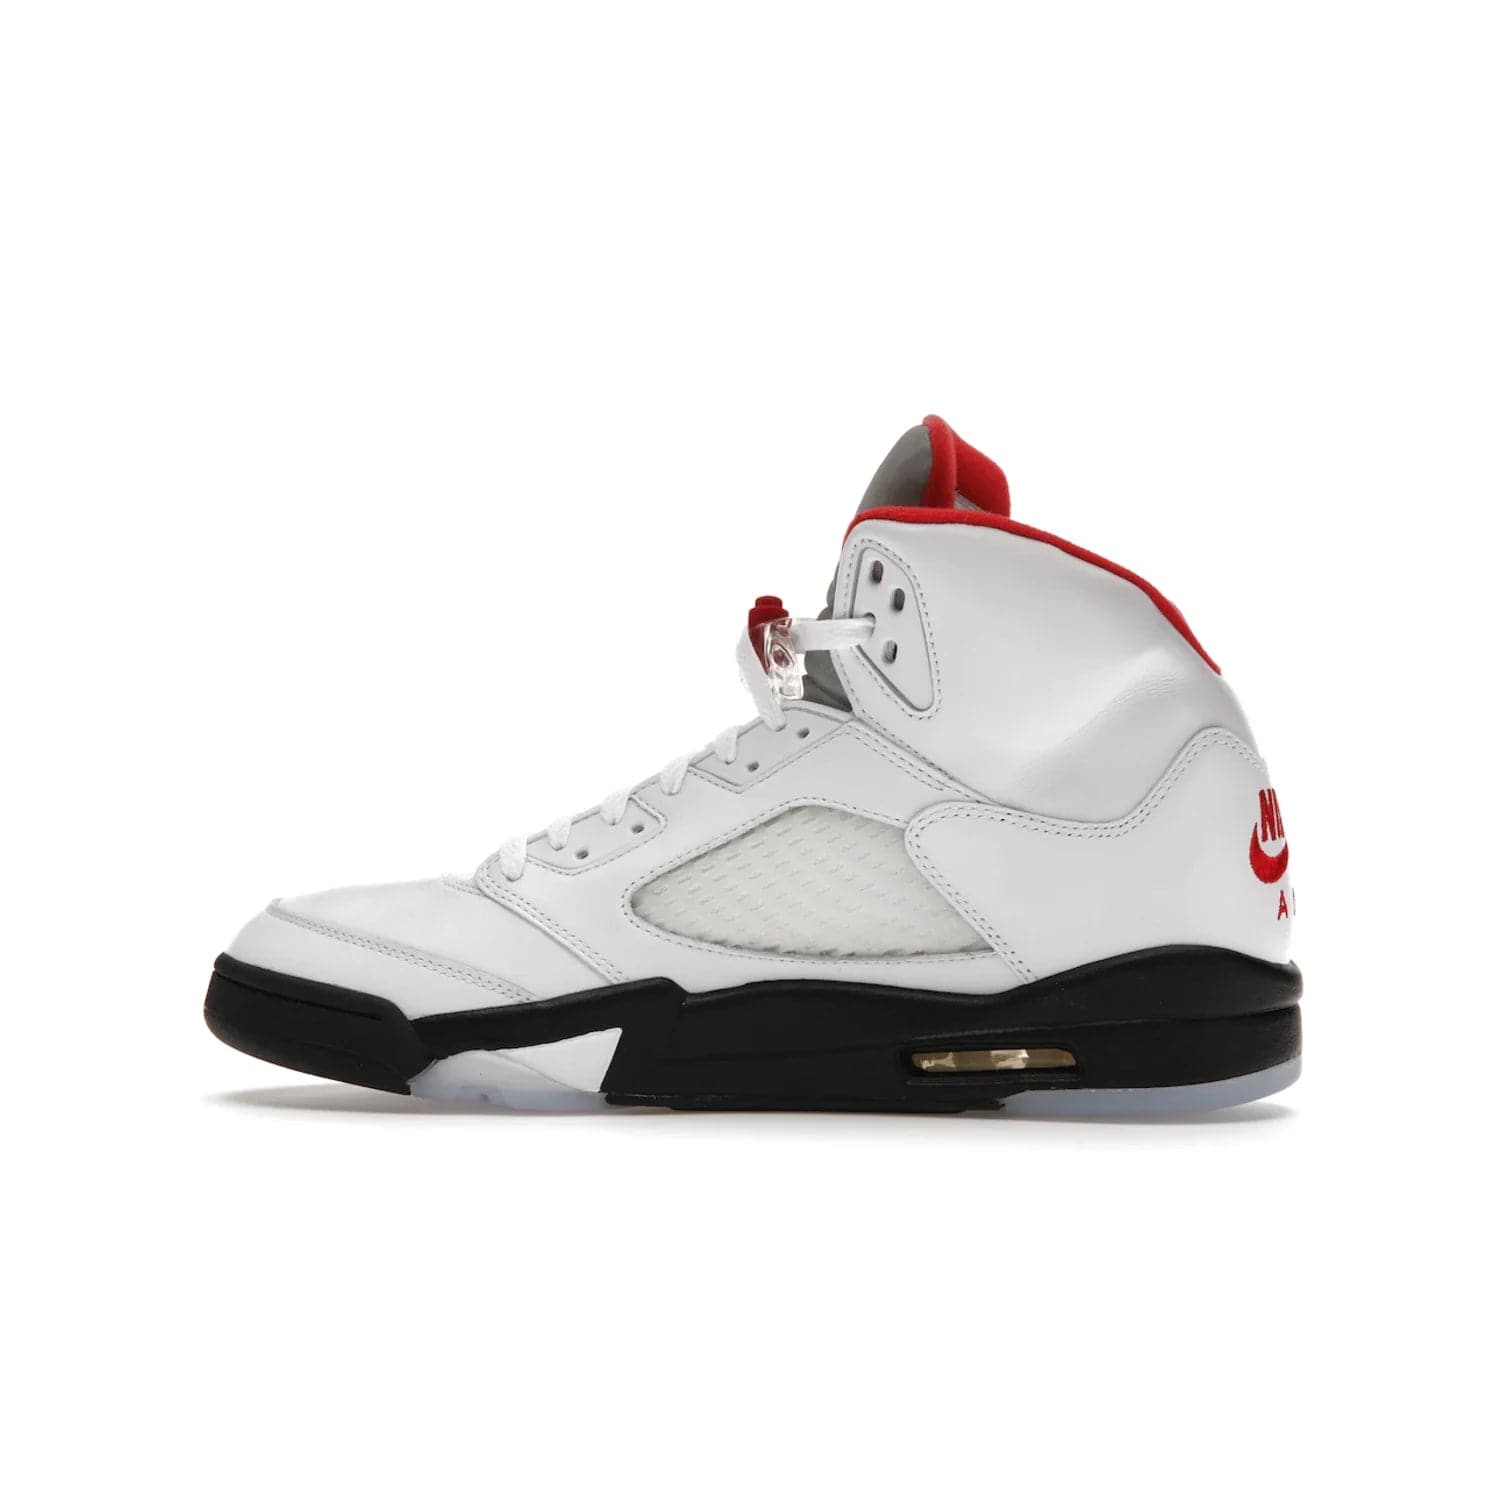 Jordan 5 Retro Fire Red Silver Tongue (2020) - Image 20 - Only at www.BallersClubKickz.com - Experience classic styling with the Jordan 5 Retro Fire Red Silver Tongue (2020). Features a white leather upper, 3M reflective tongue, midsole colorblocking, and an icy translucent outsole. Now available, upgrade your shoe collection today.